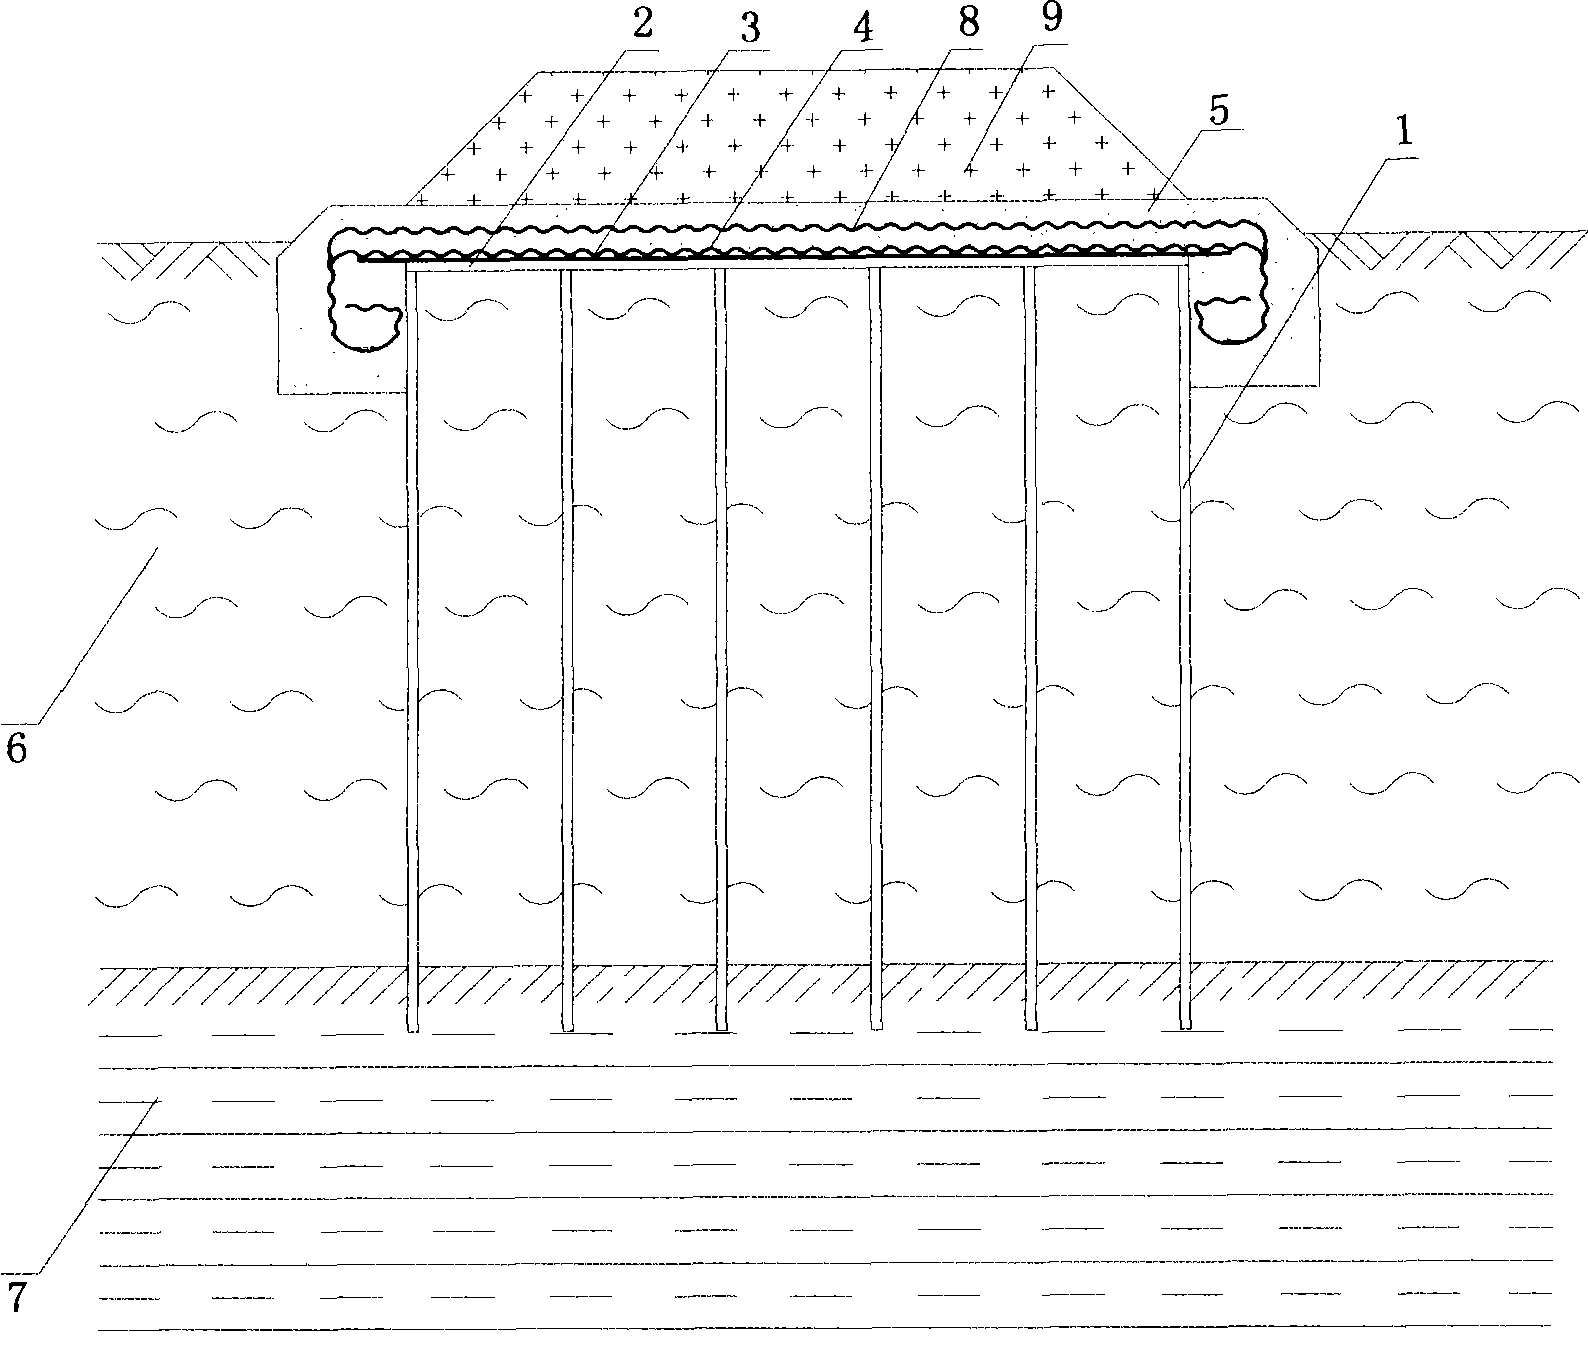 Rigid gridding and pile combined foundation and its use in soft soil foundation reinforcement